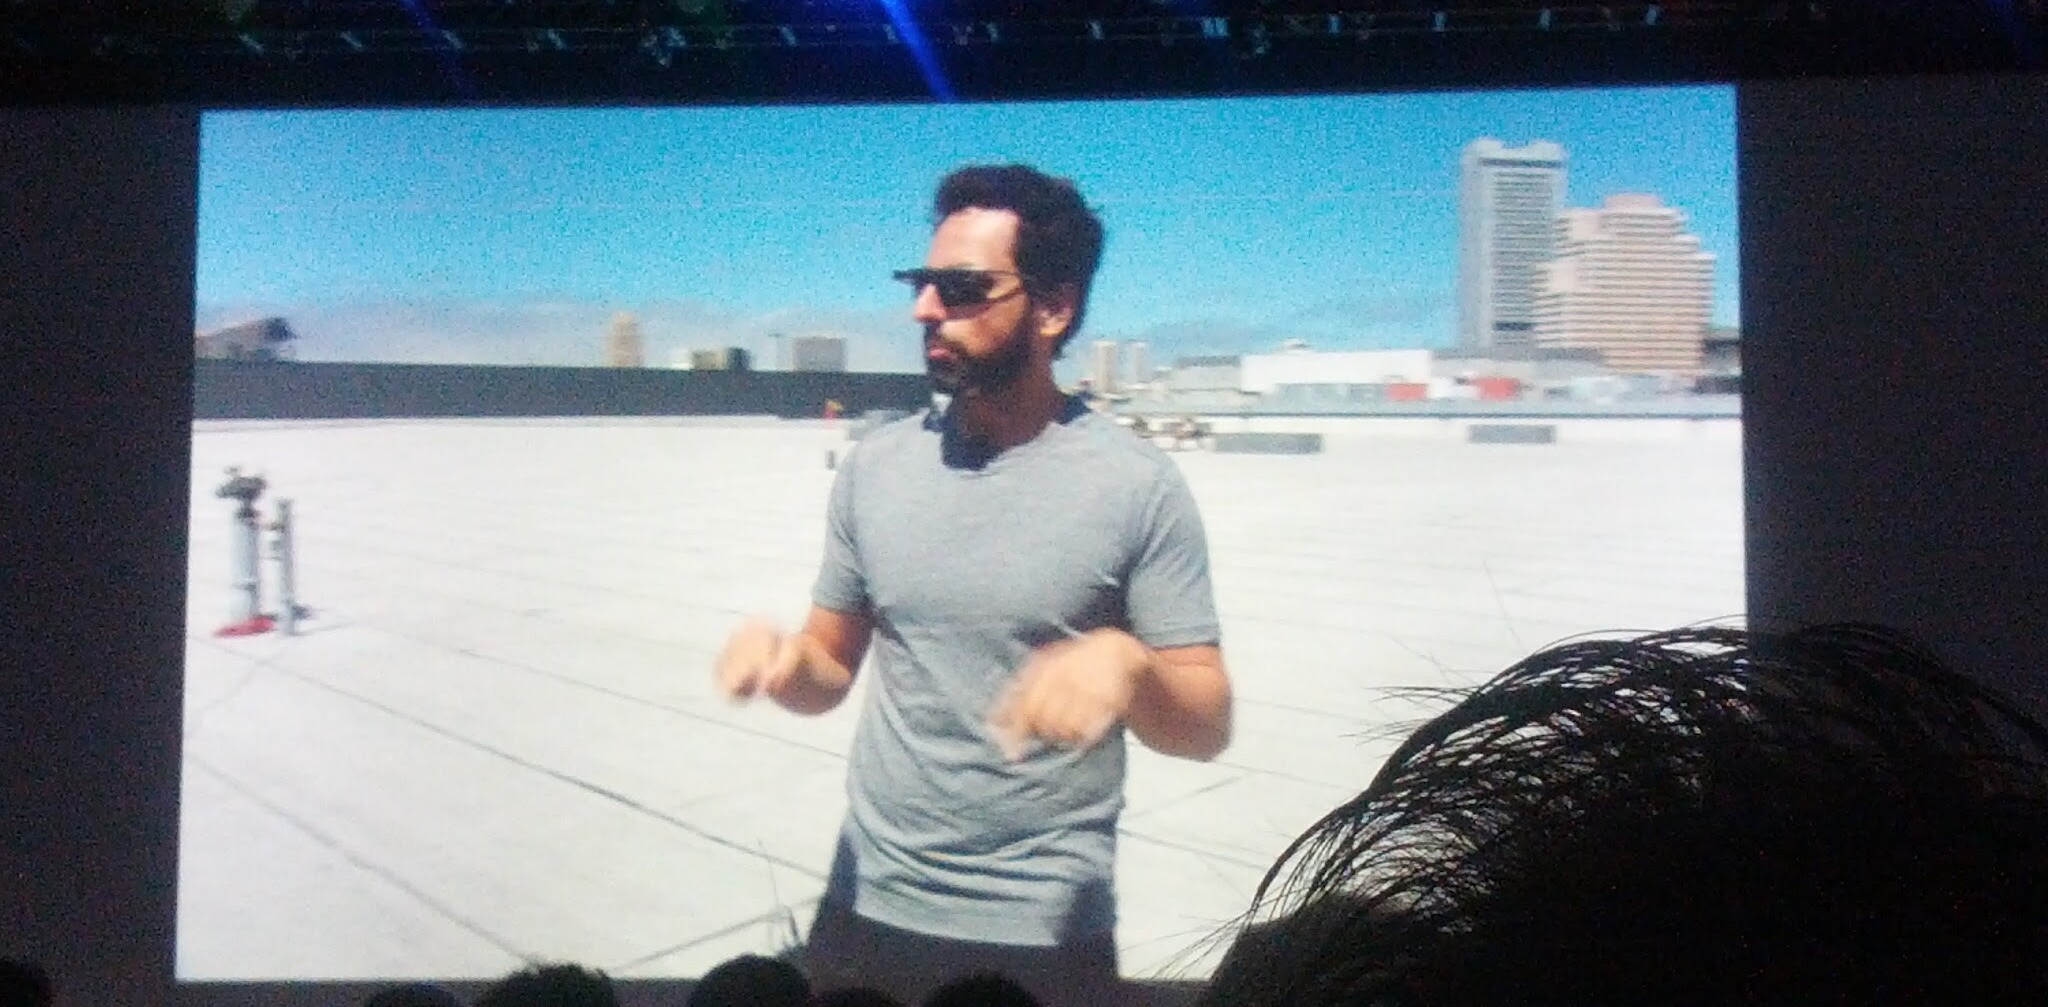 Sergey Brin sends out a welcome note to developers who pre-ordered Google Glass